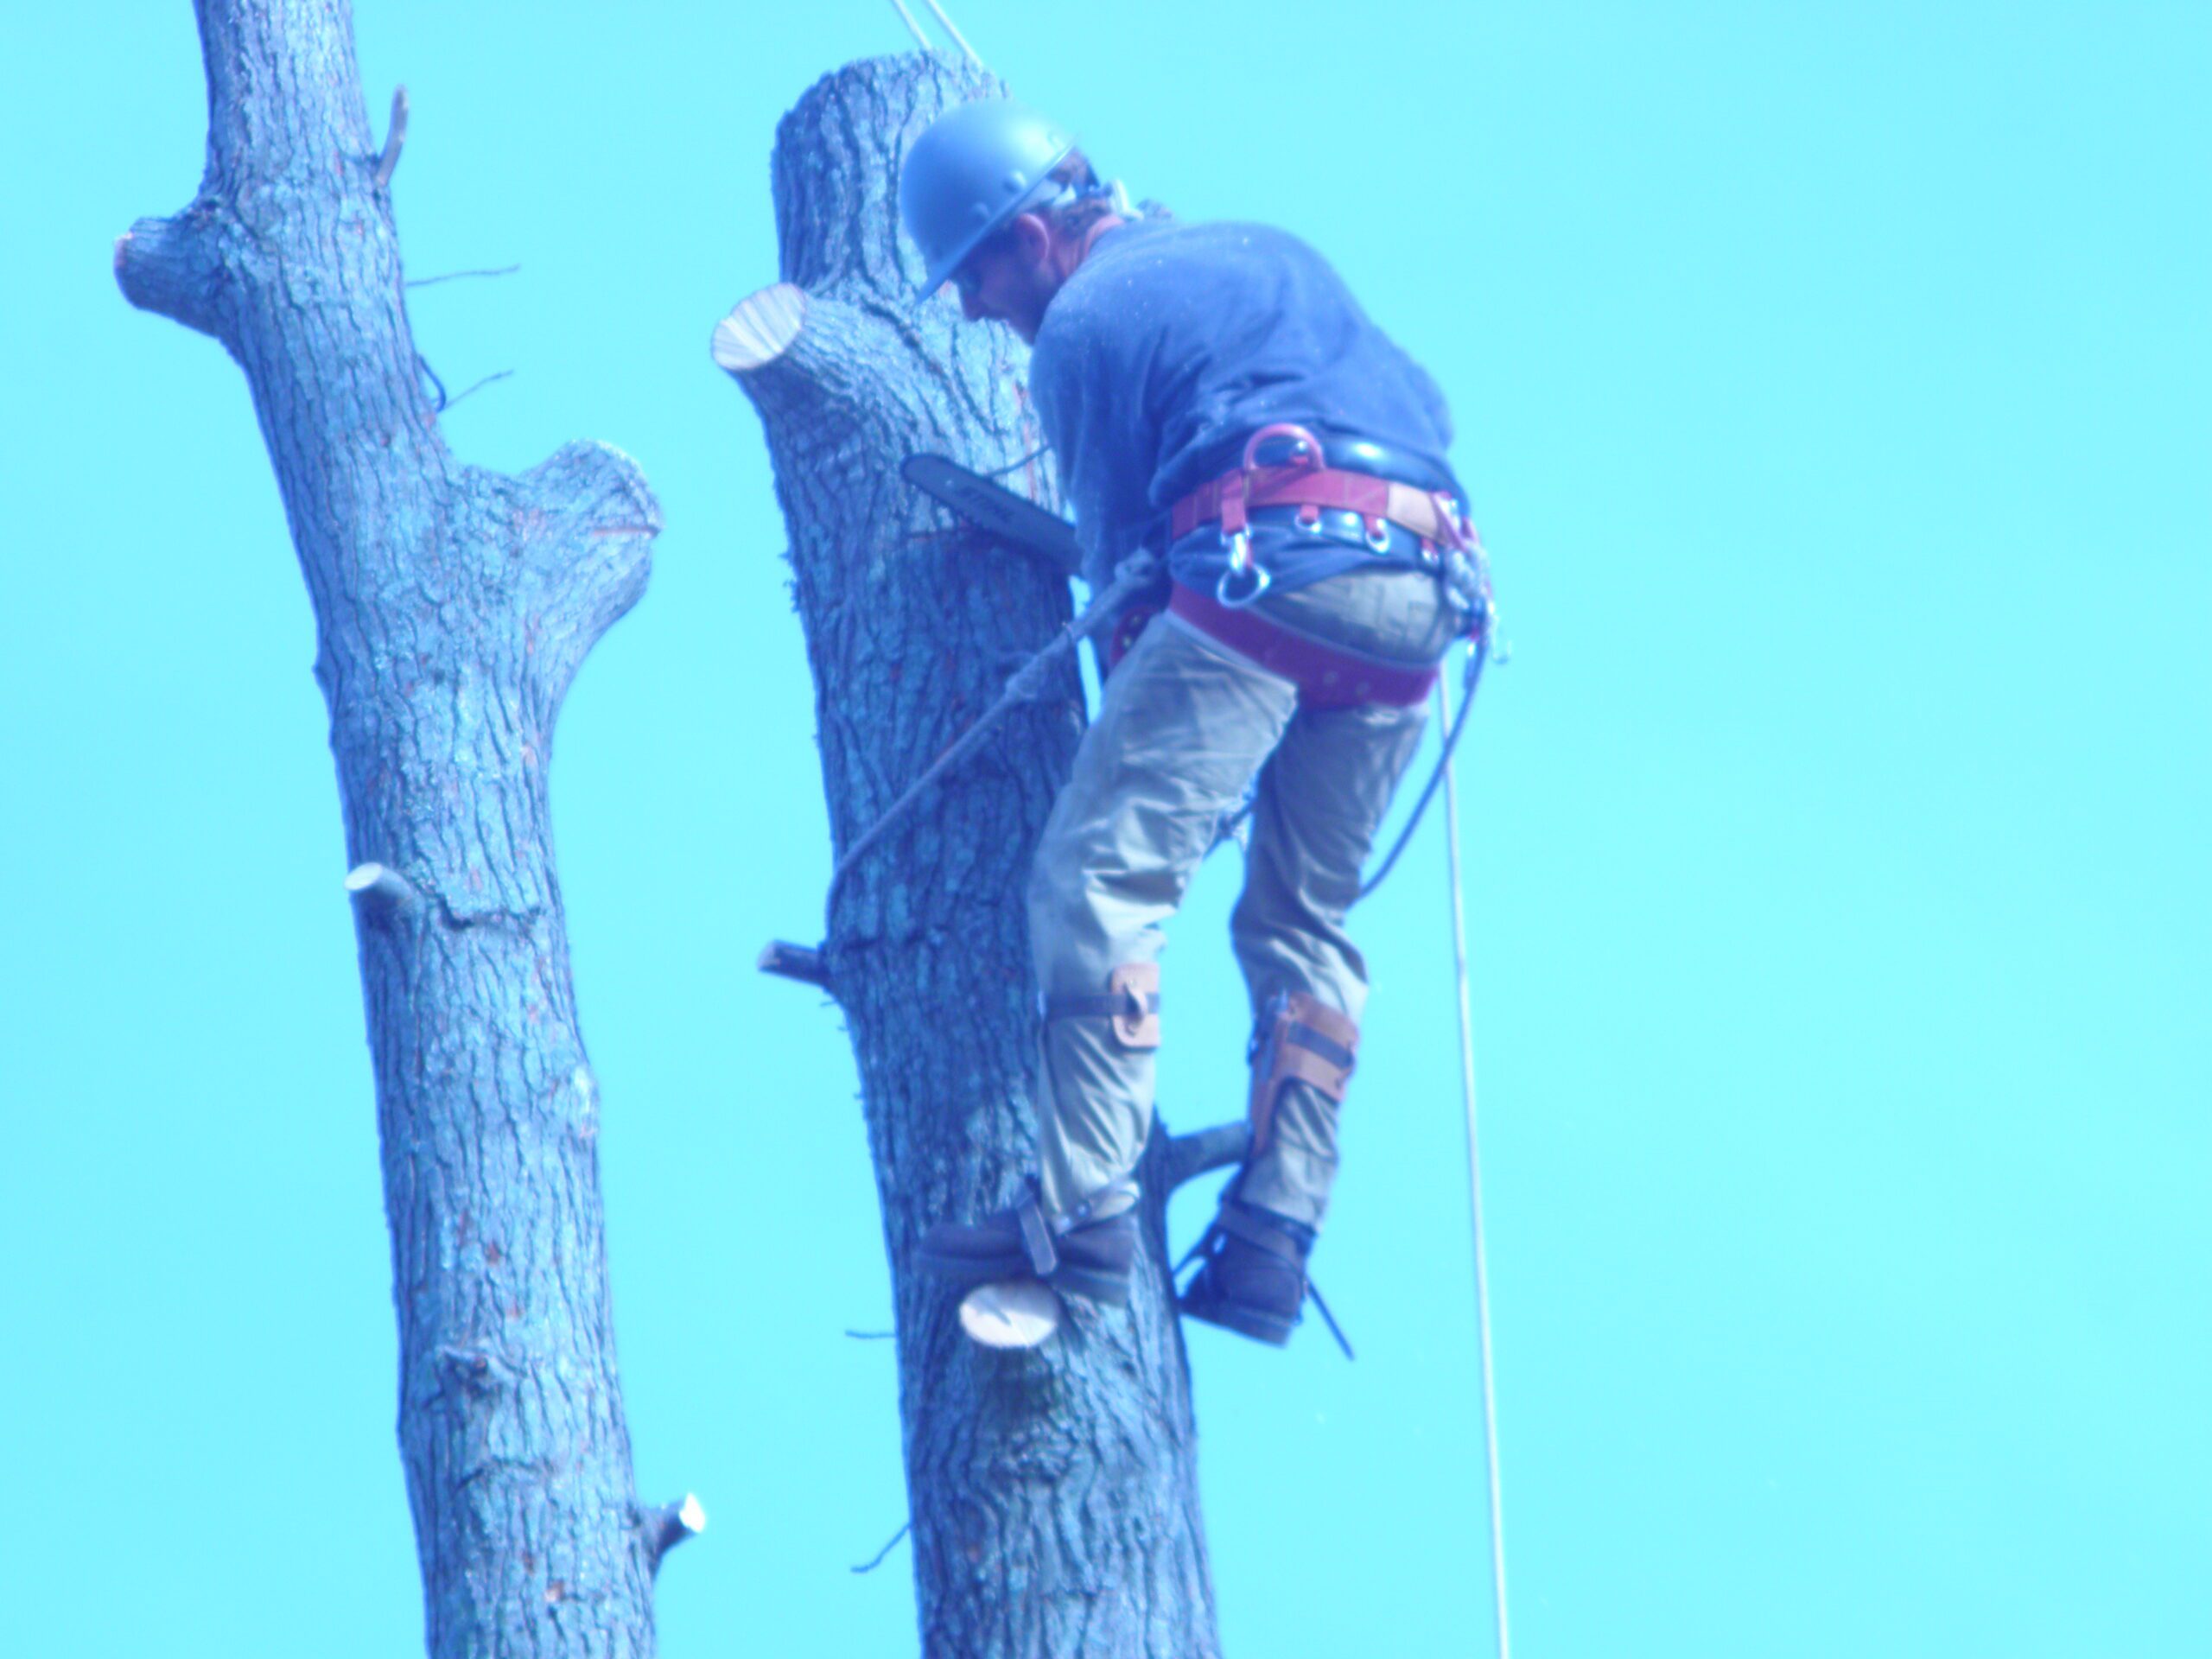 Professional arborist performing tree removal services